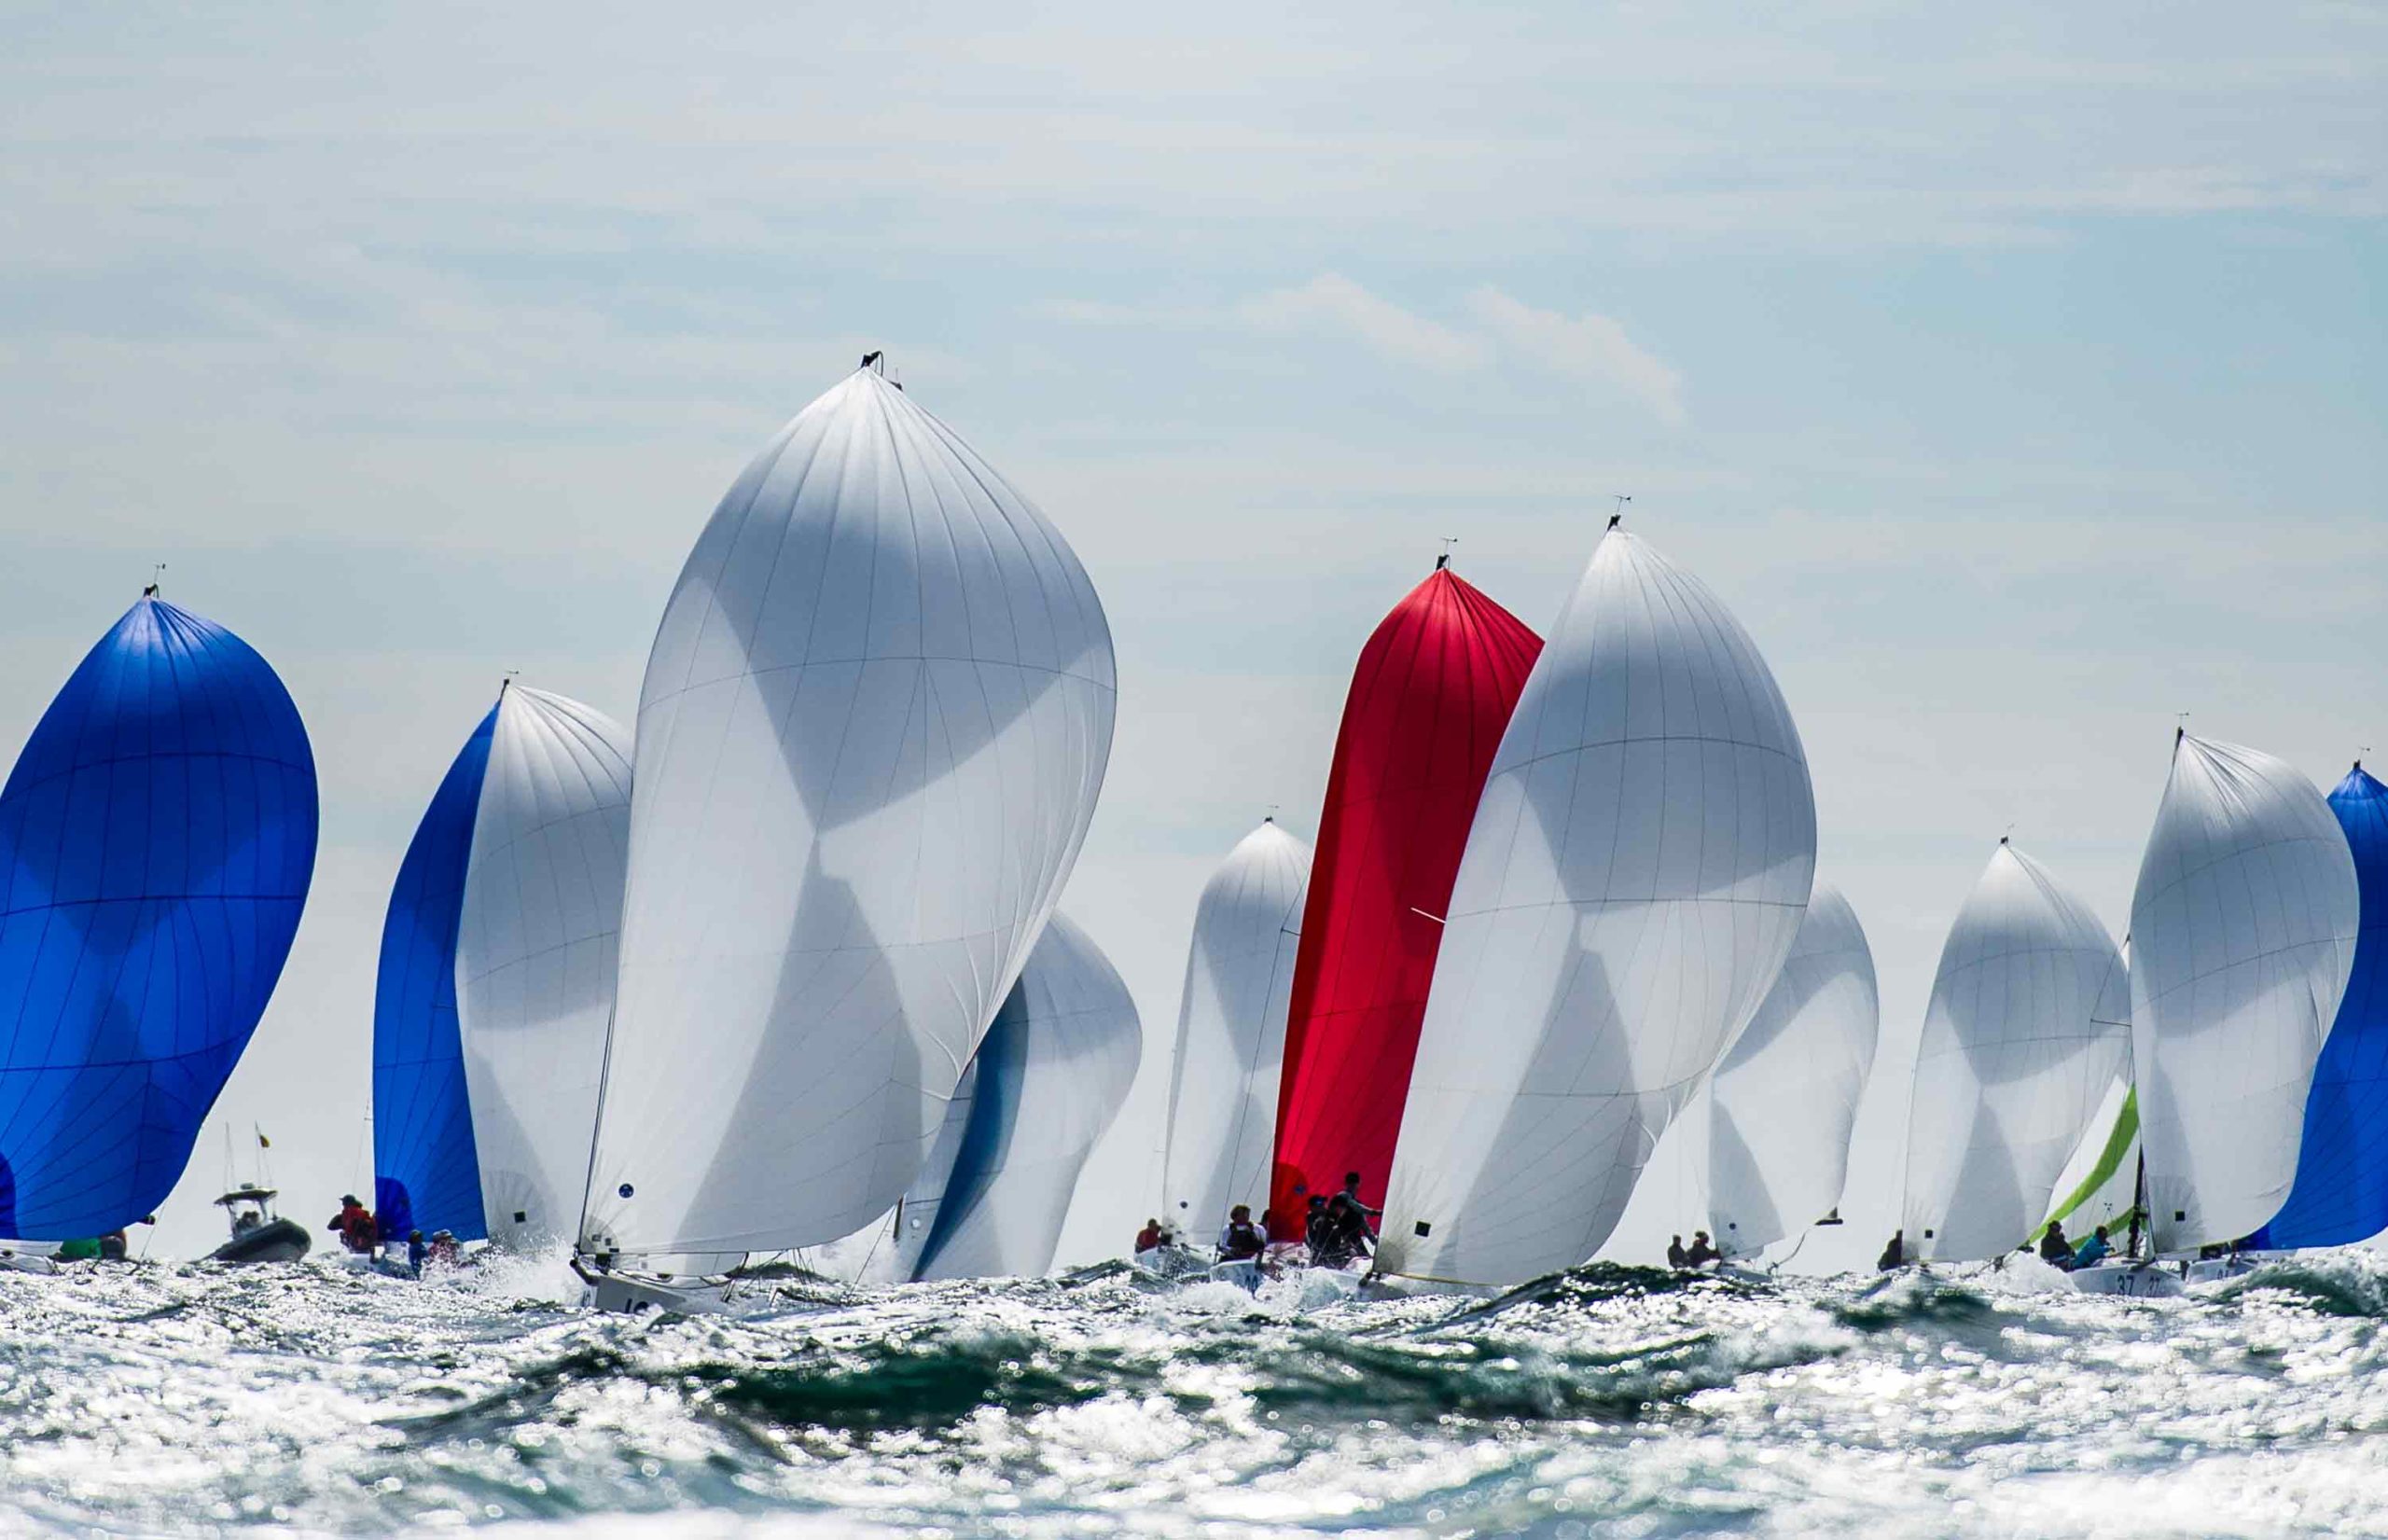 J/70 Class Association – J/70 since 2014 – Let’s celebrate 10 years of the best racing on the planet!